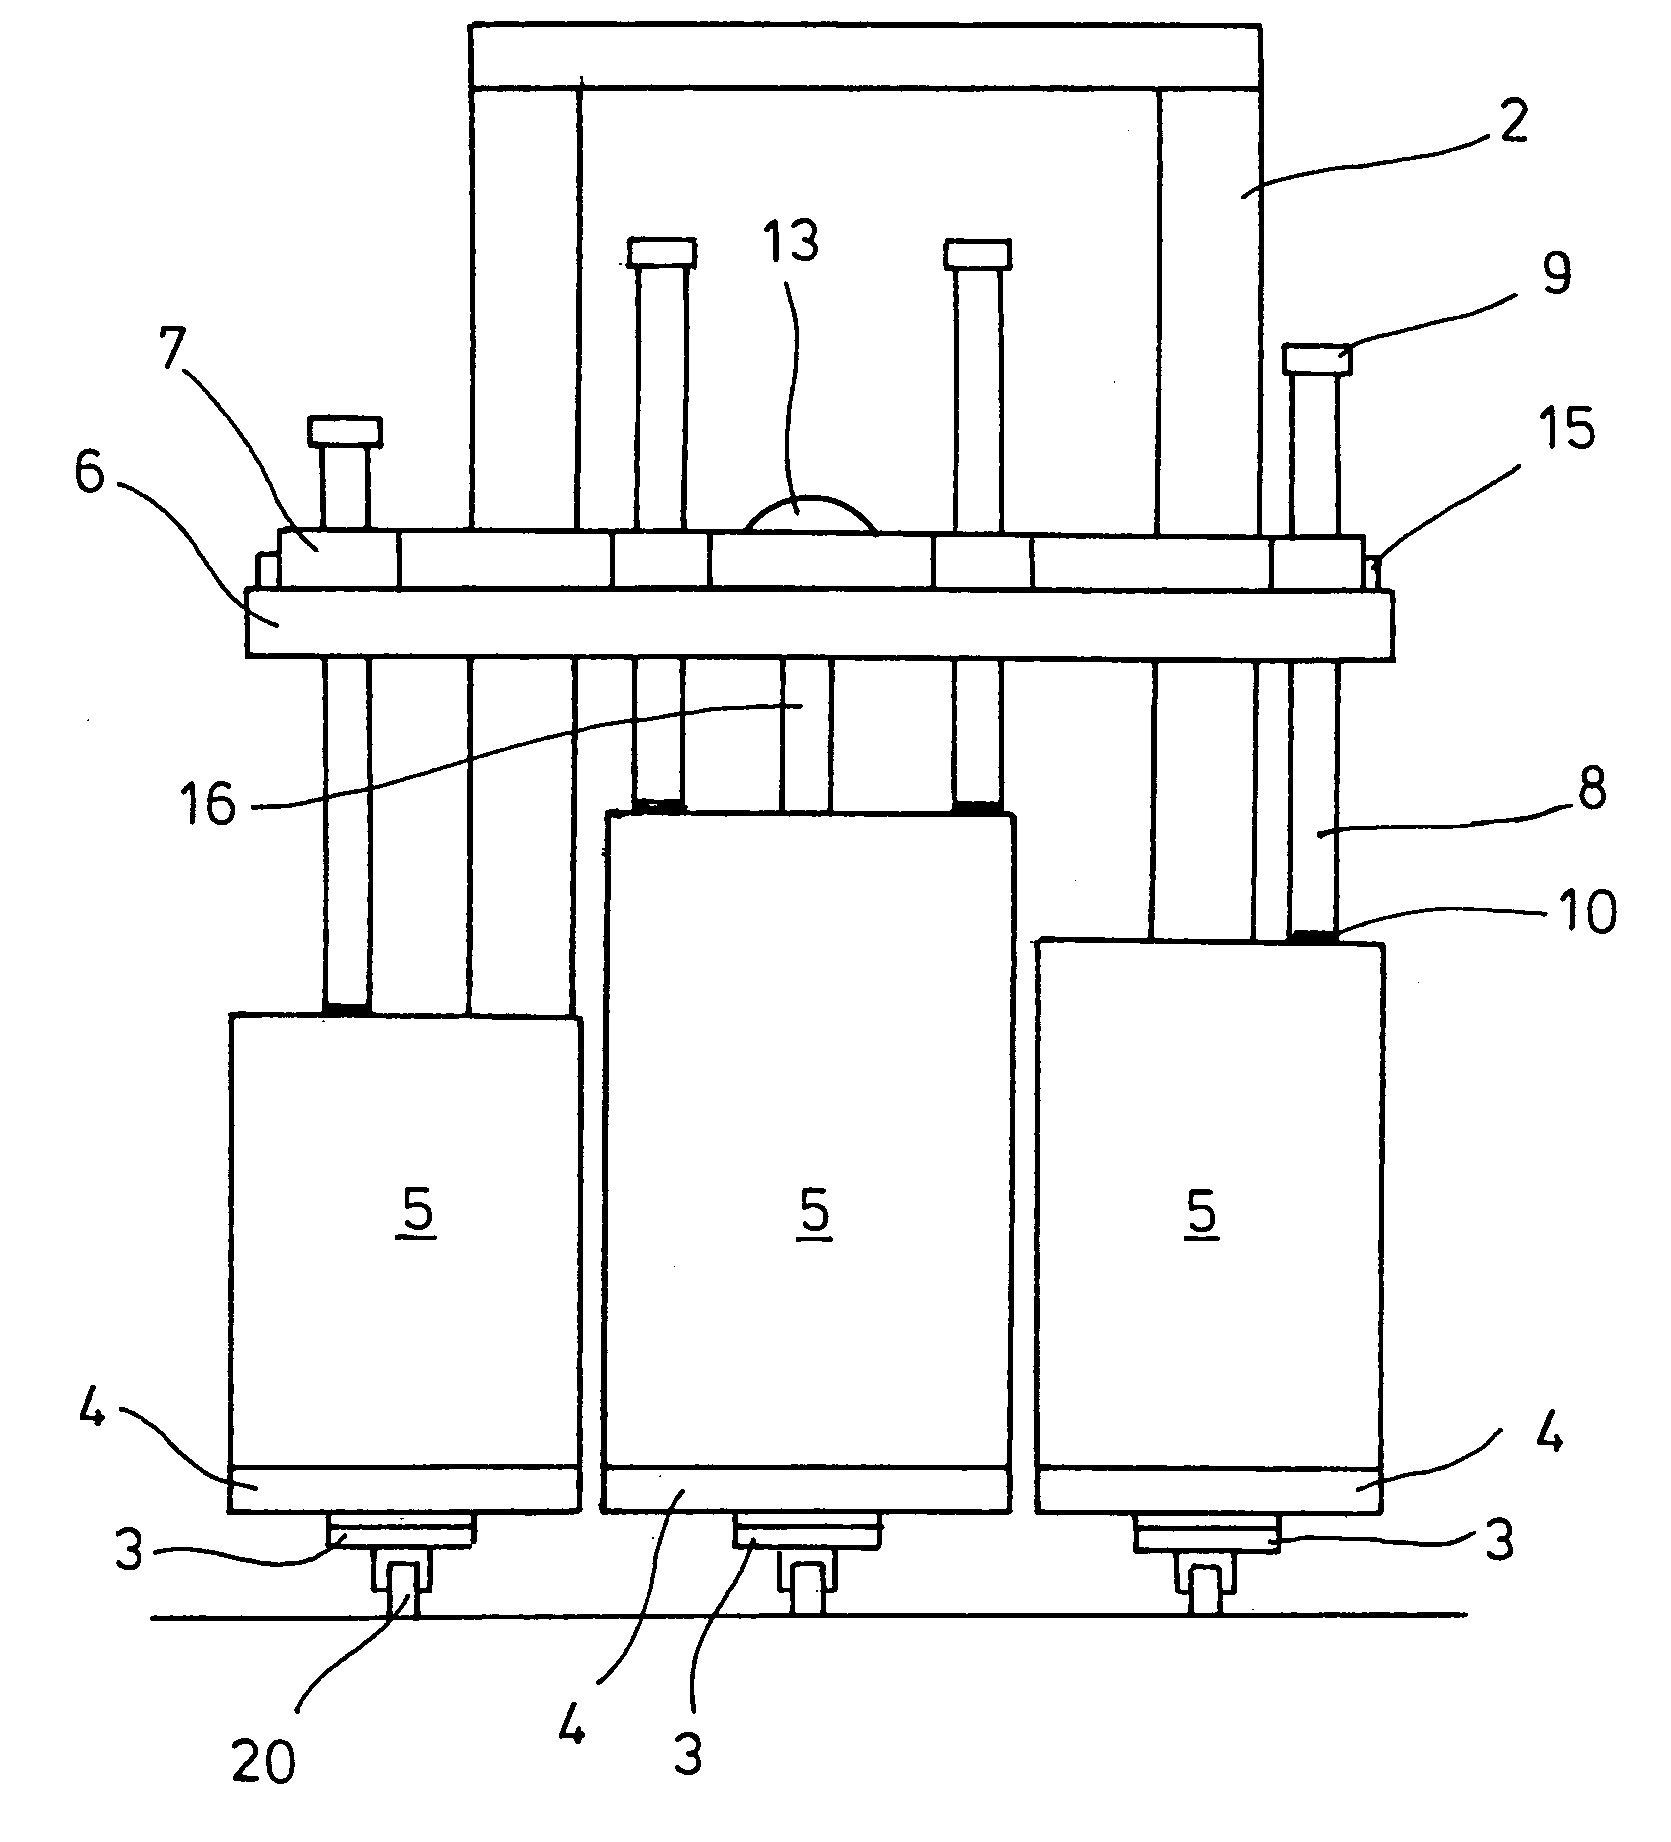 Device for holding a load on a load support of an industrial truck